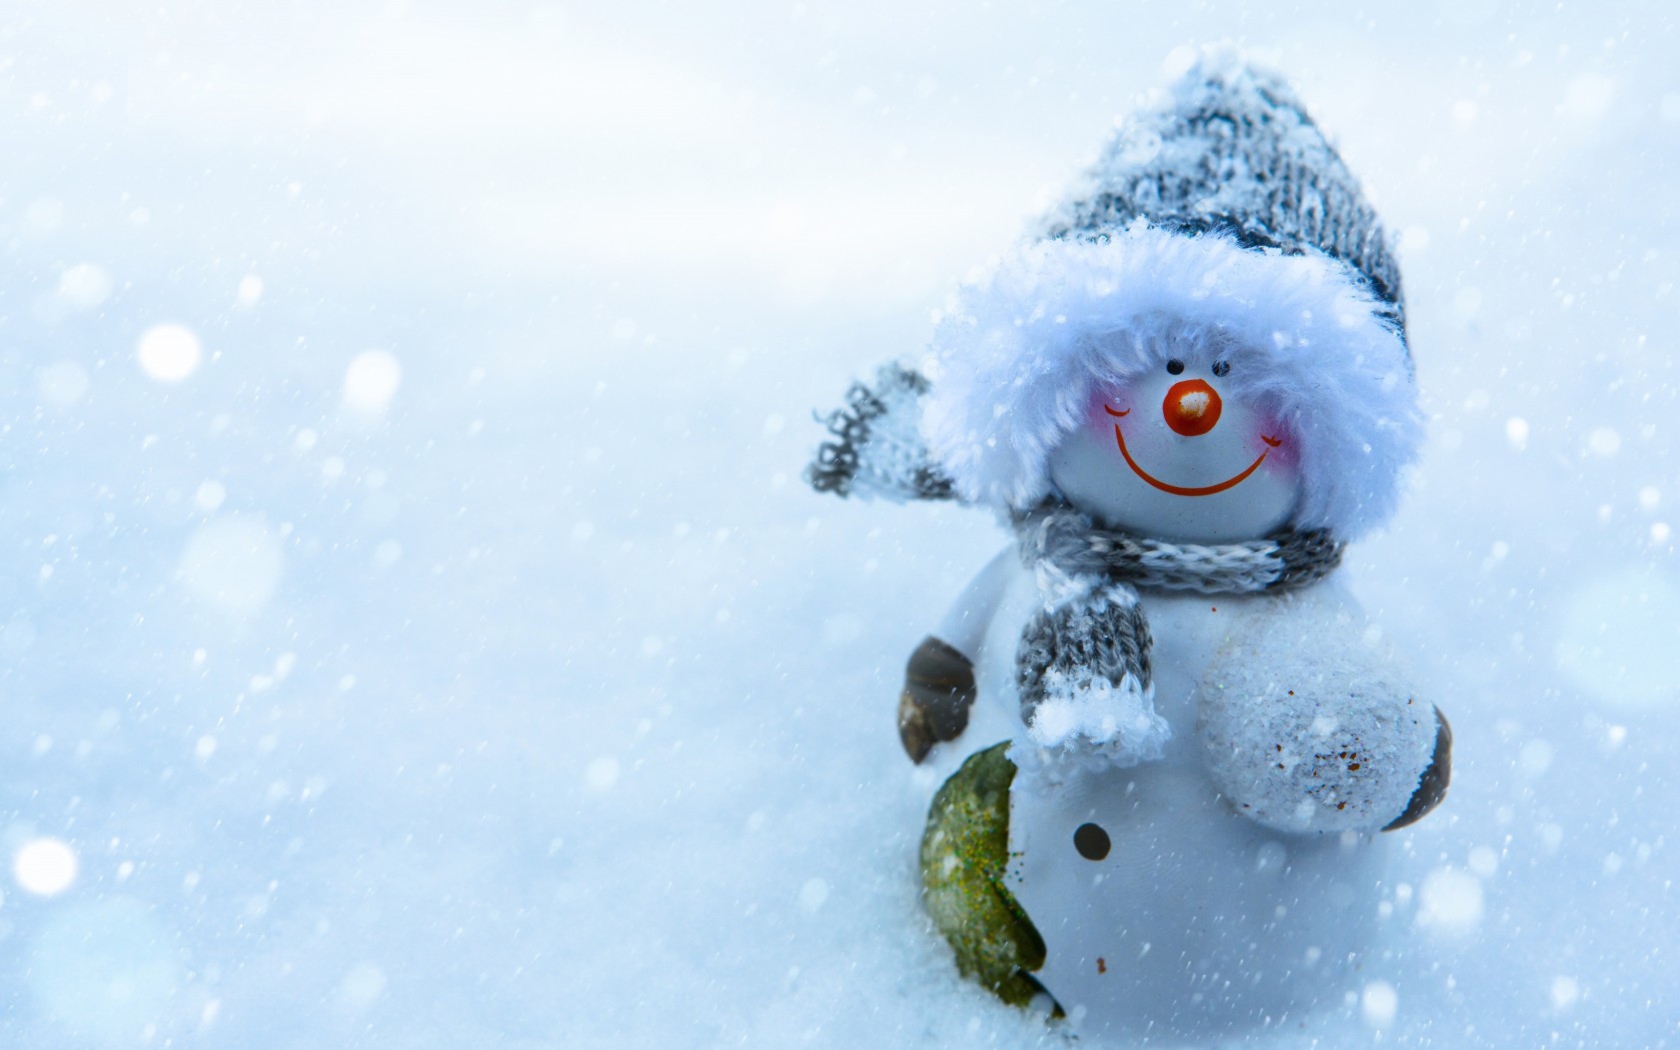 Snowman Covered With Snowflakes wallpaper 1680x1050